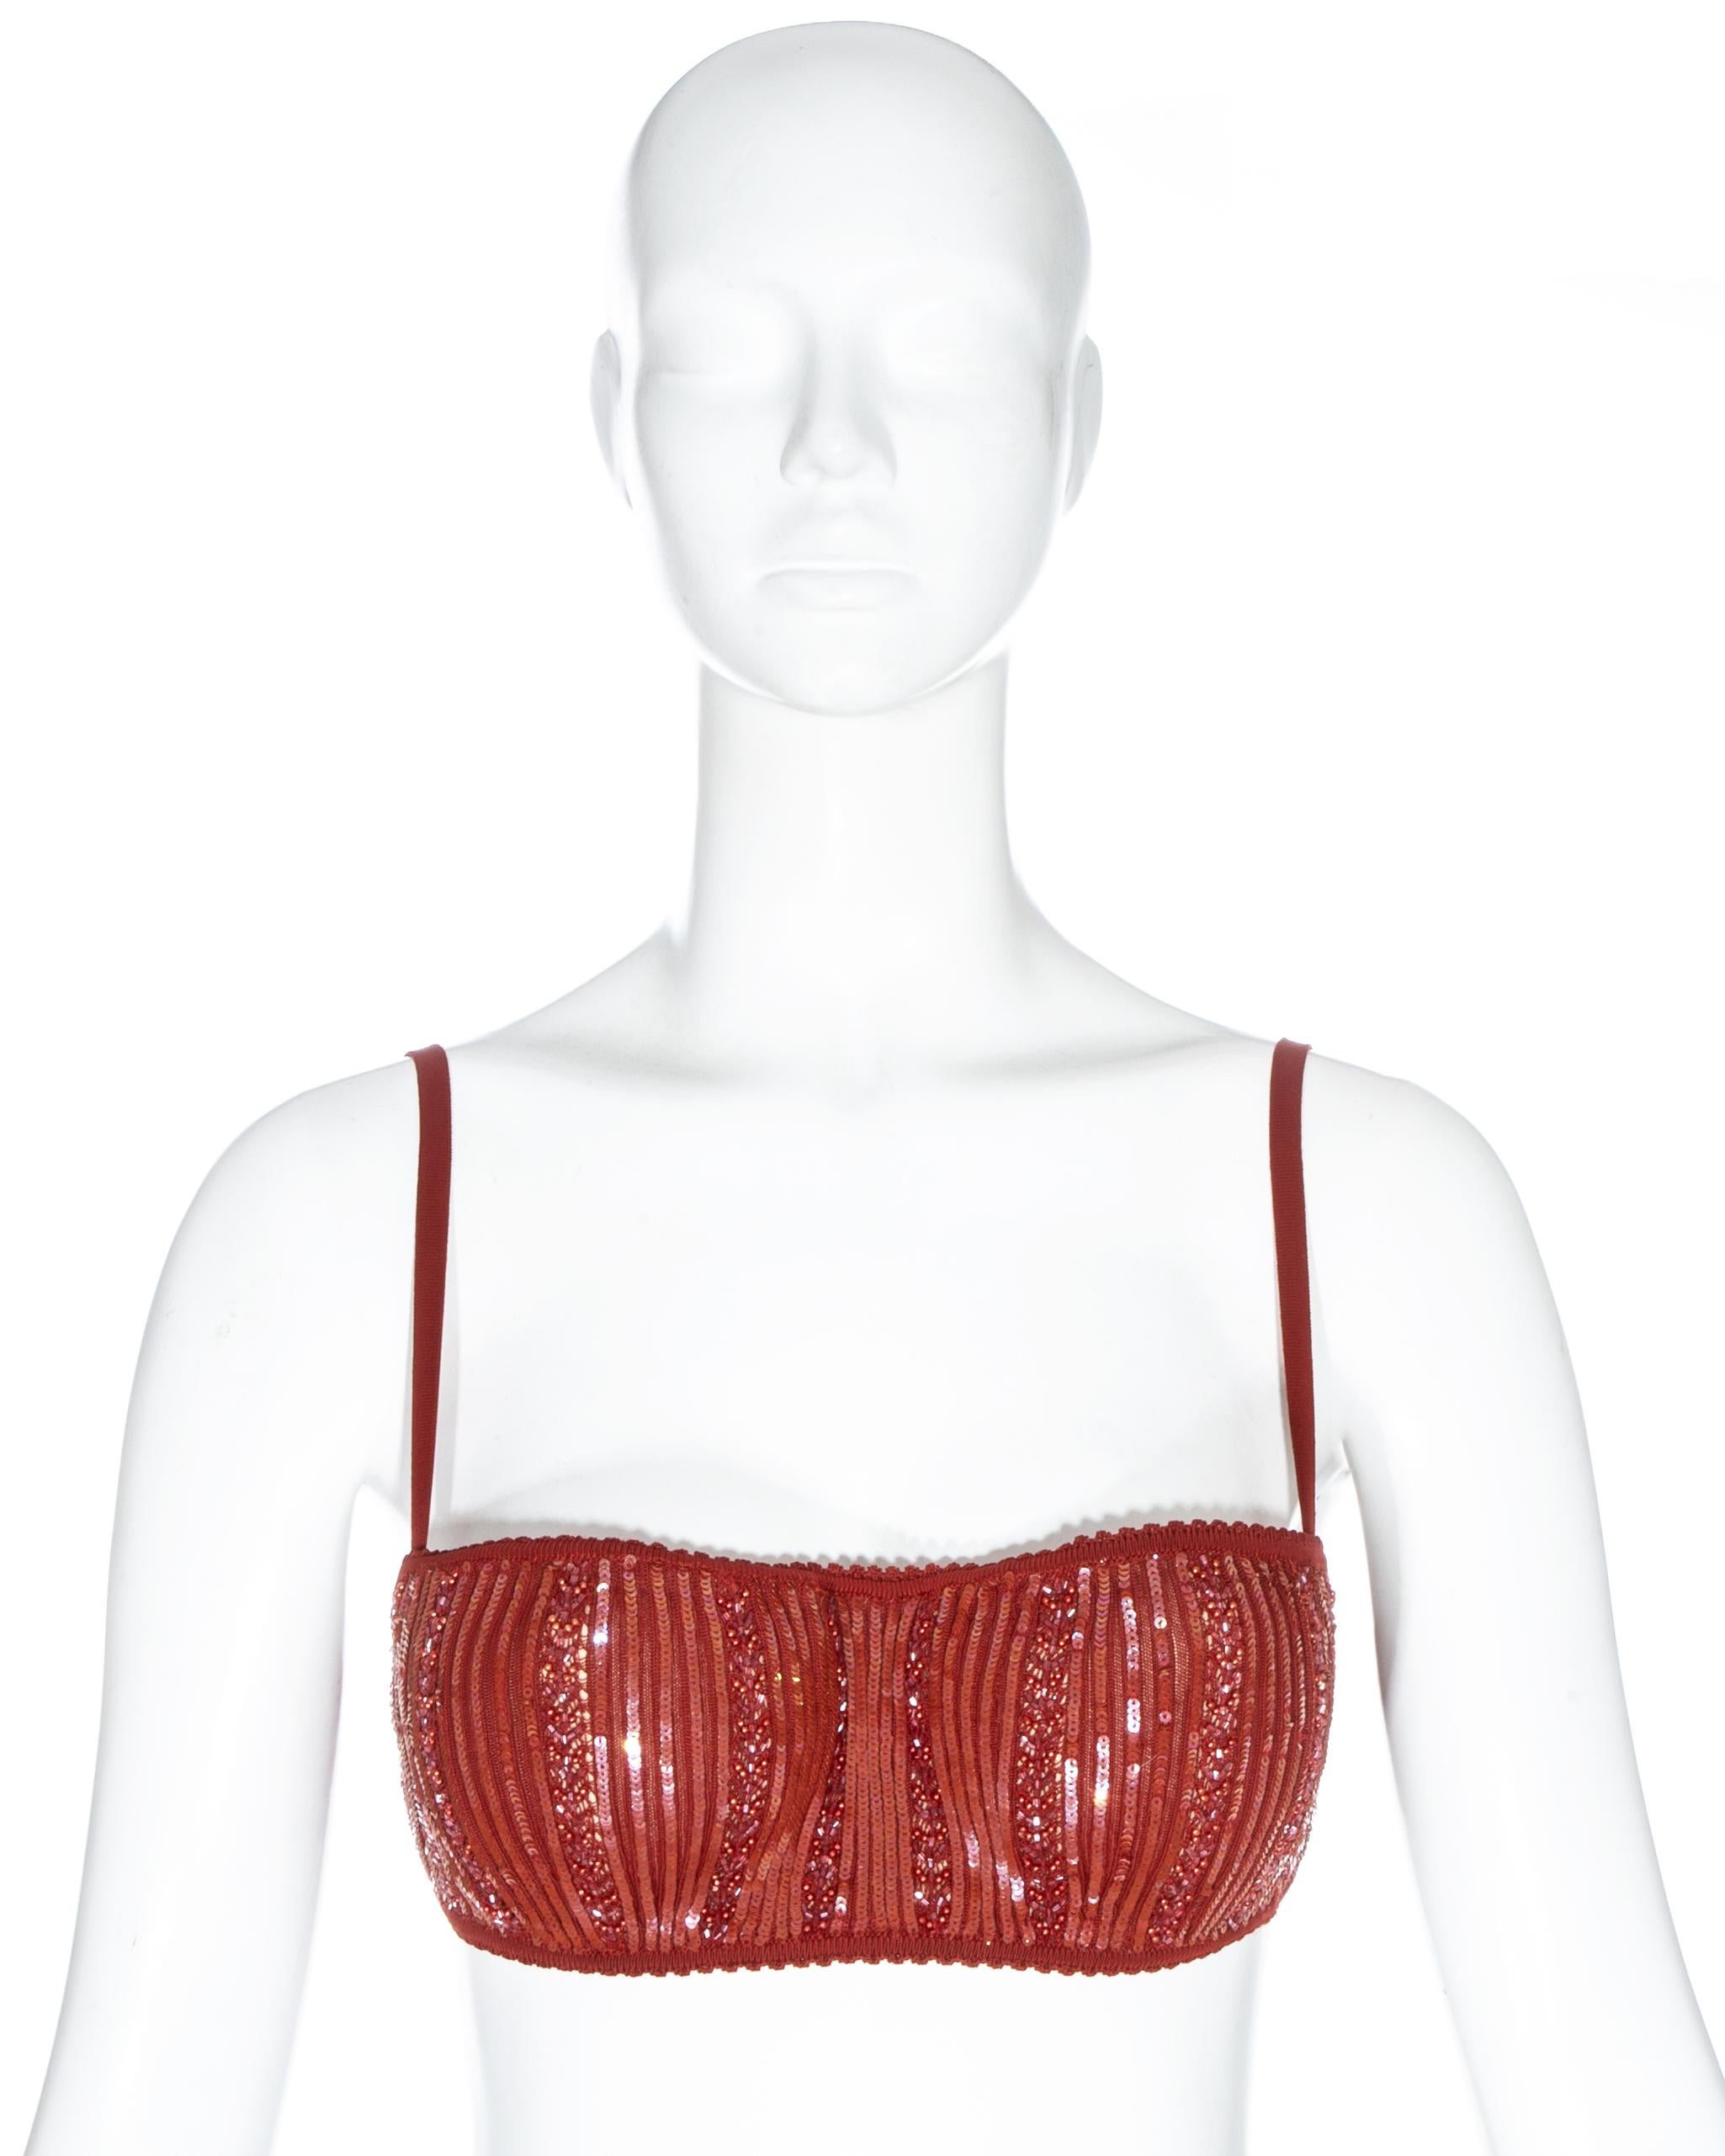 Azzedine Alaia red sequin evening bra with padded bust.

Spring-Summer 1996
